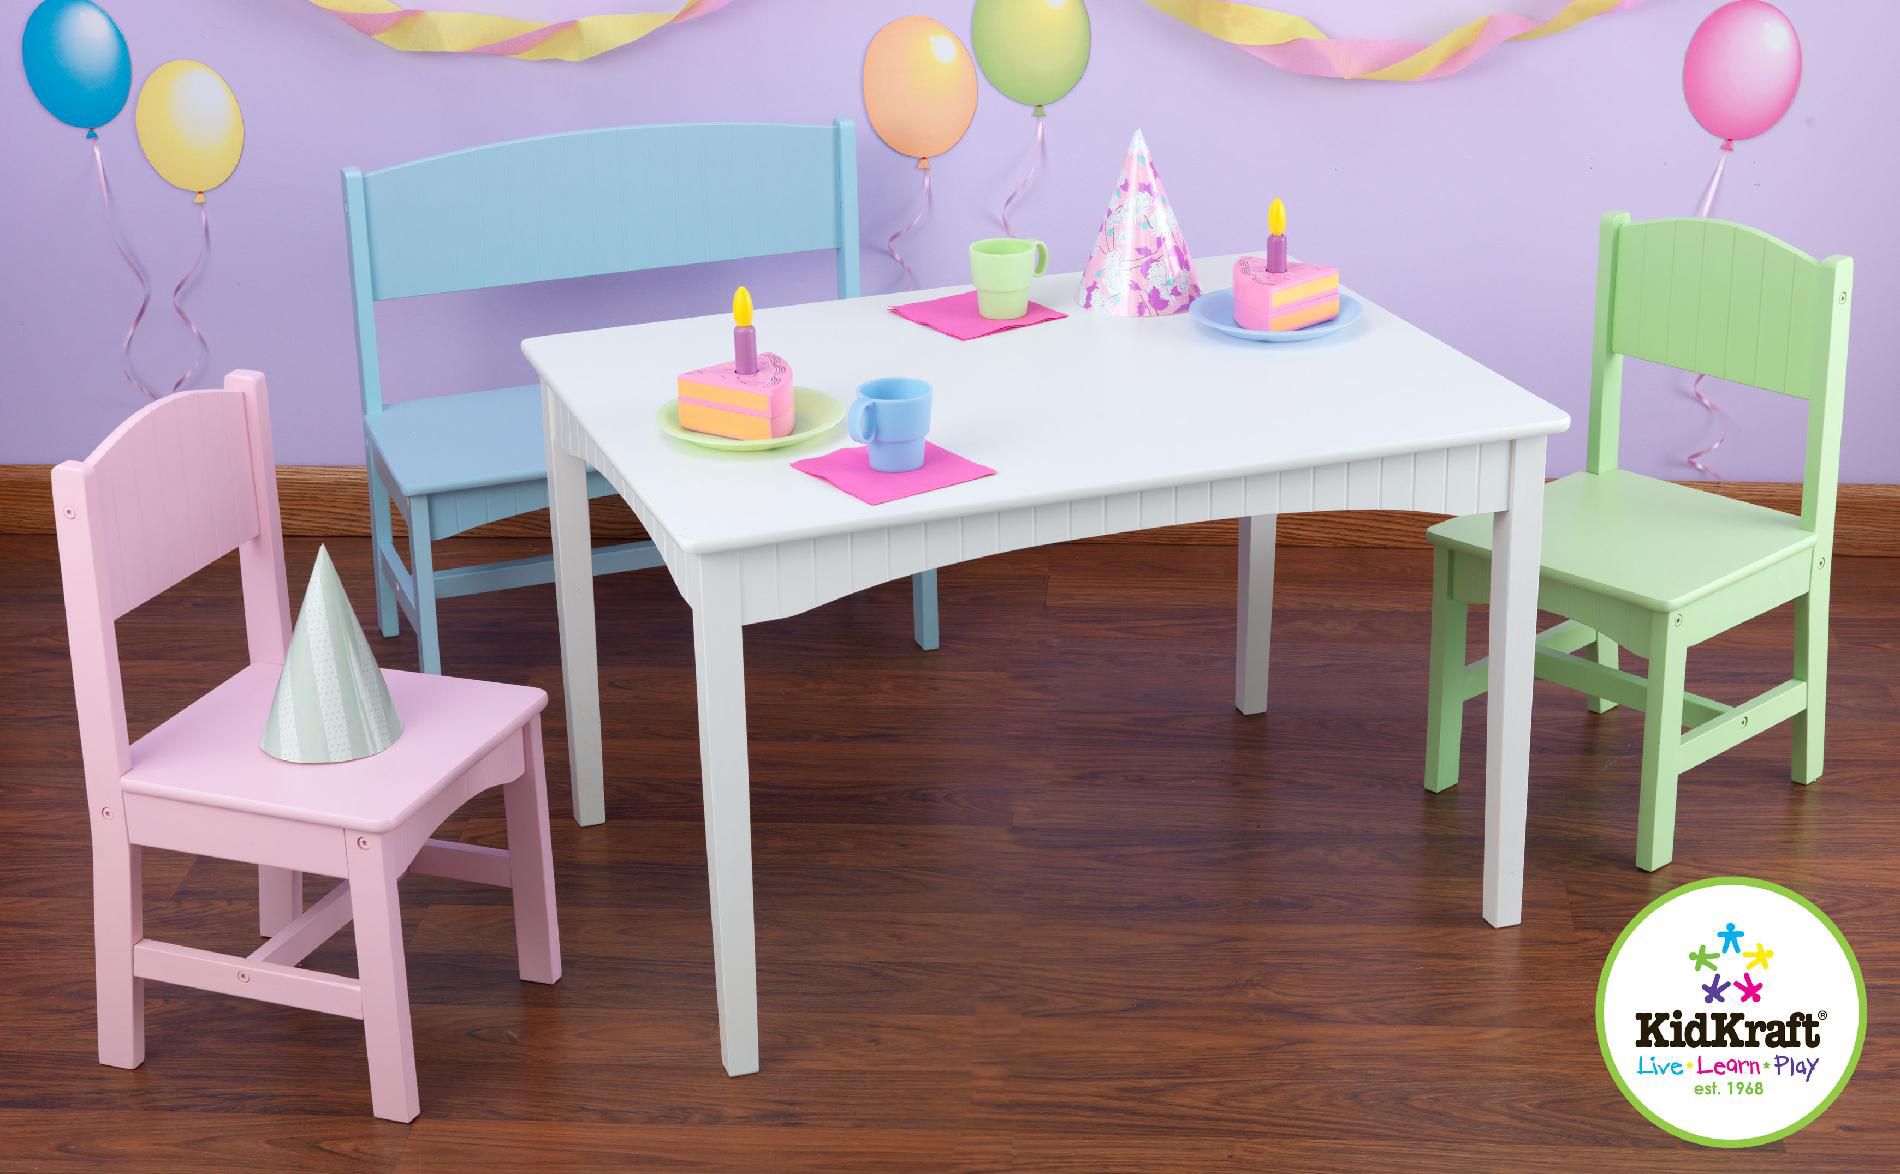 KidKraft Nantucket Table with Bench & 2 Chairs - Pastel